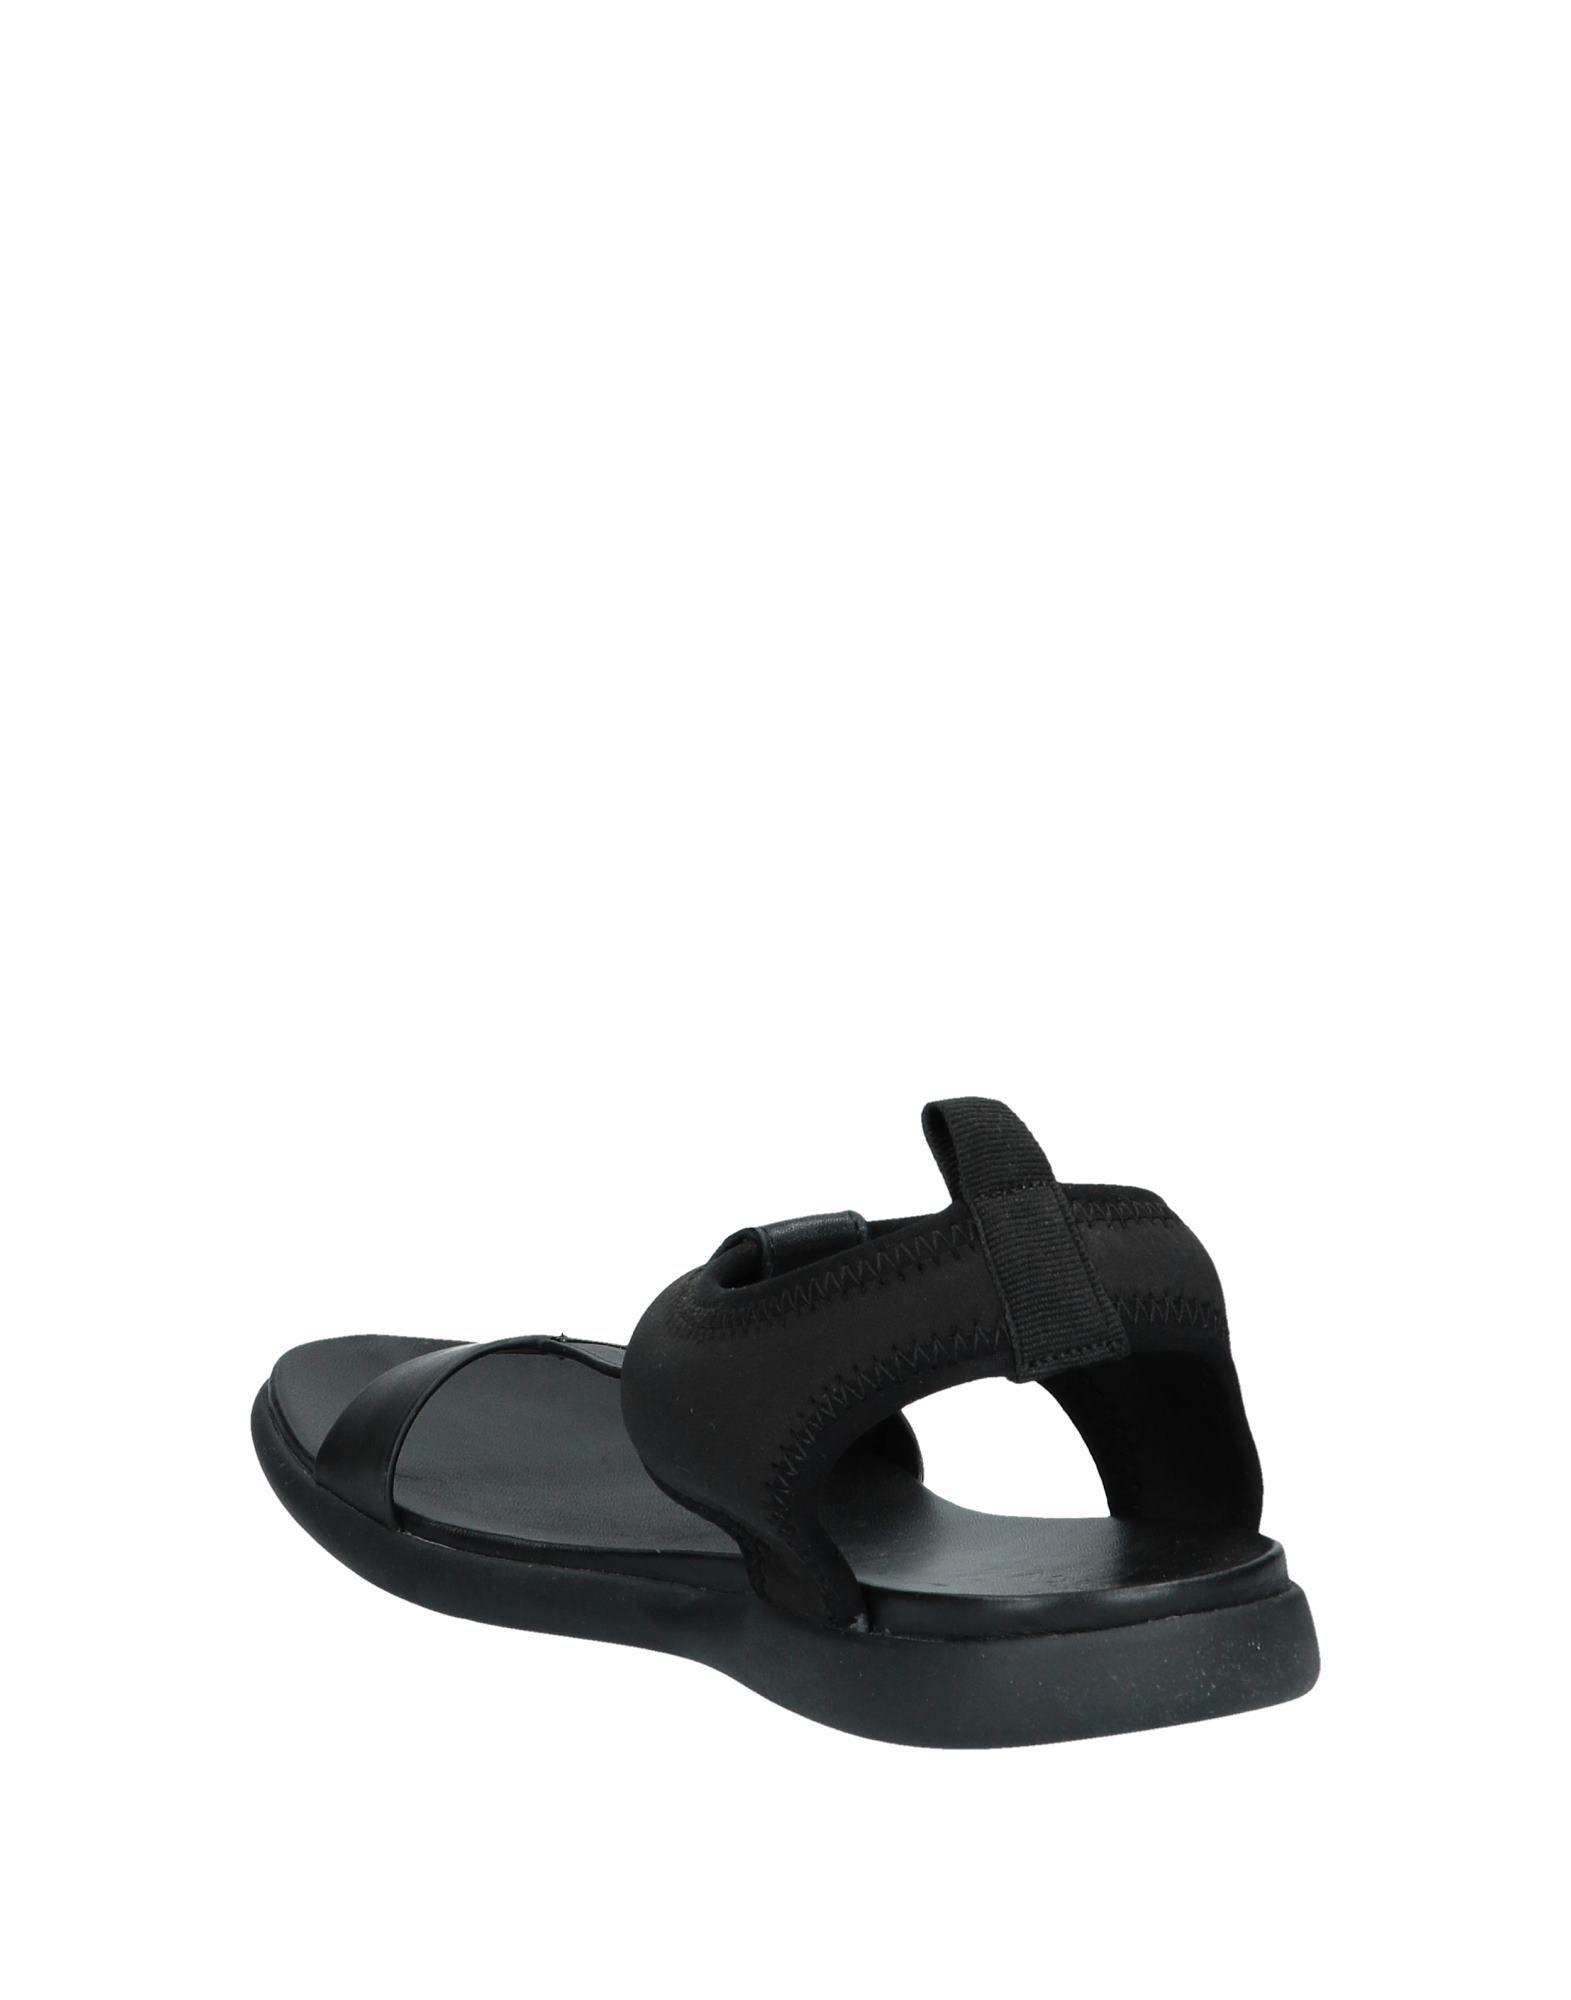 DKNY Leather Sandals in Black - Lyst